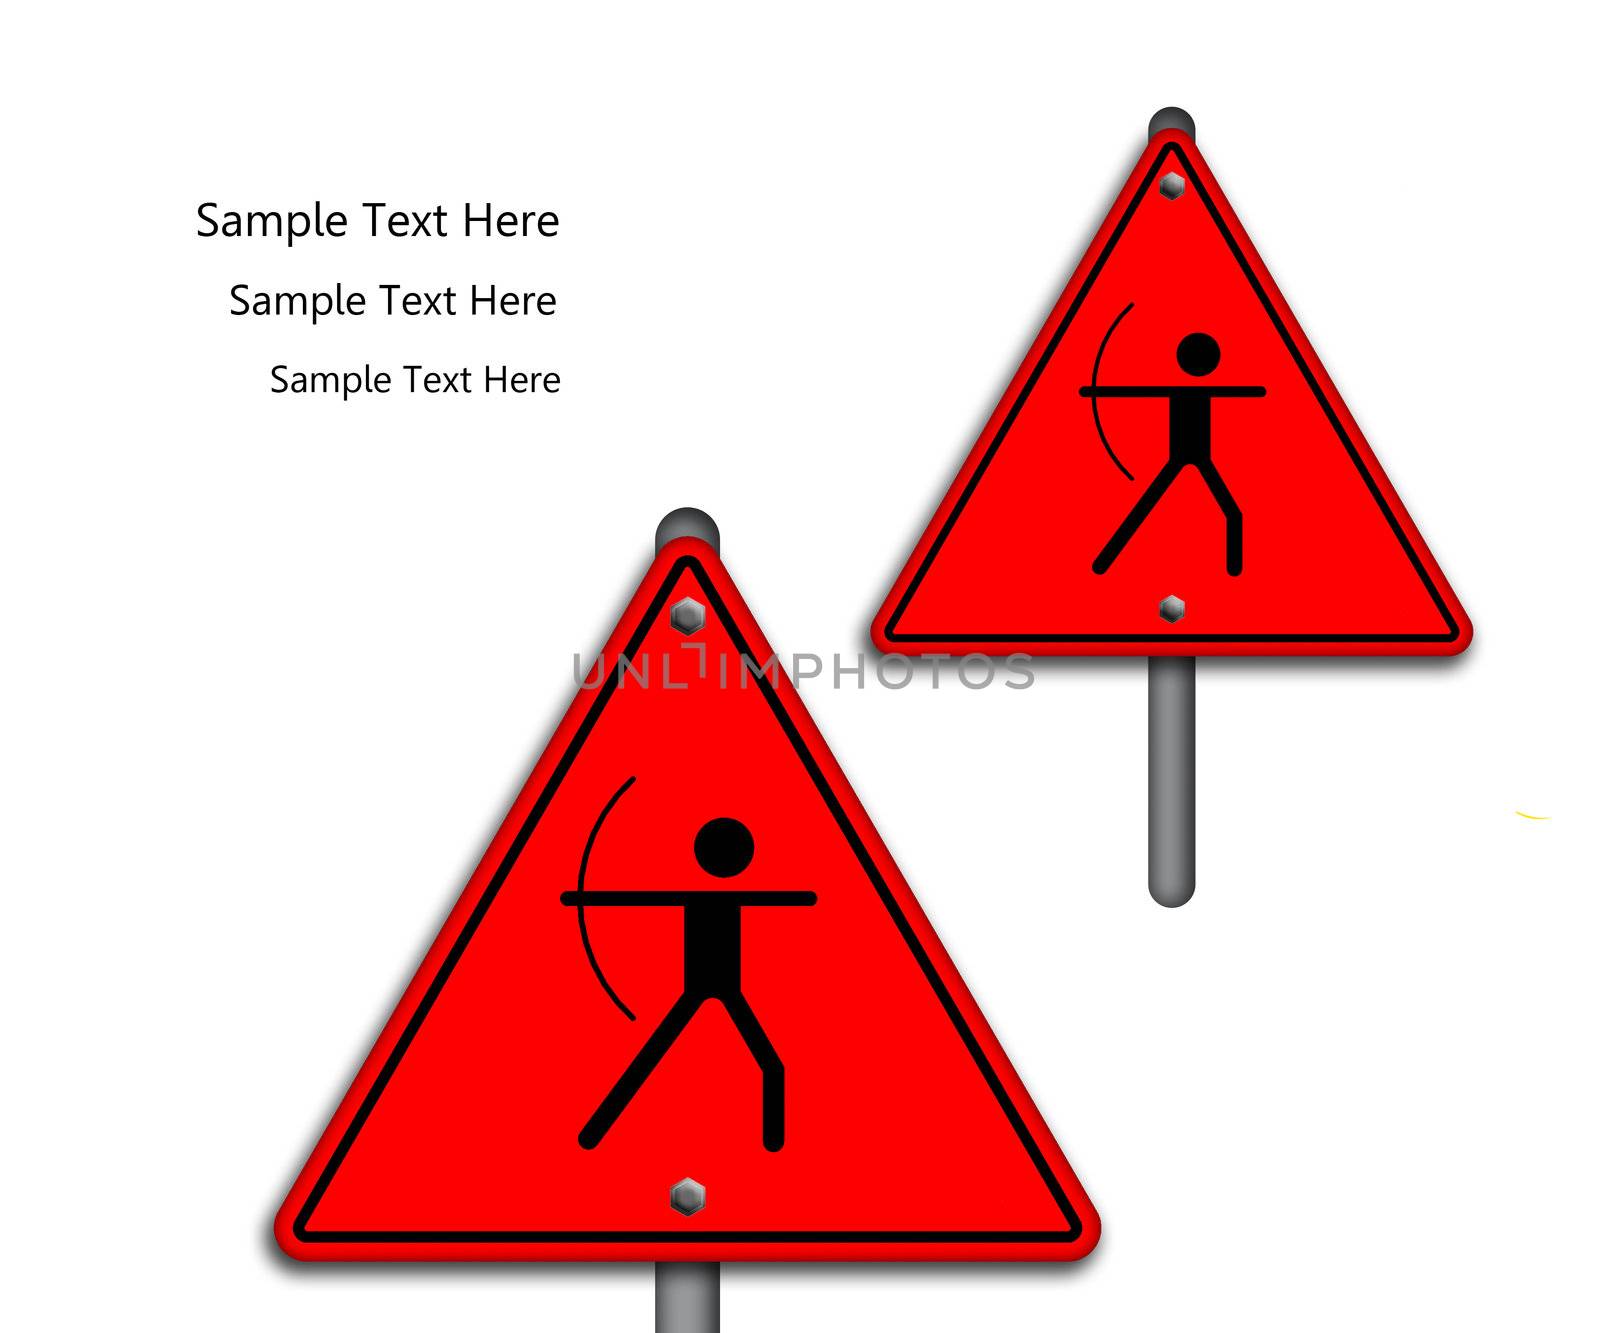 Archery icon in traffic plate isolated on white background.